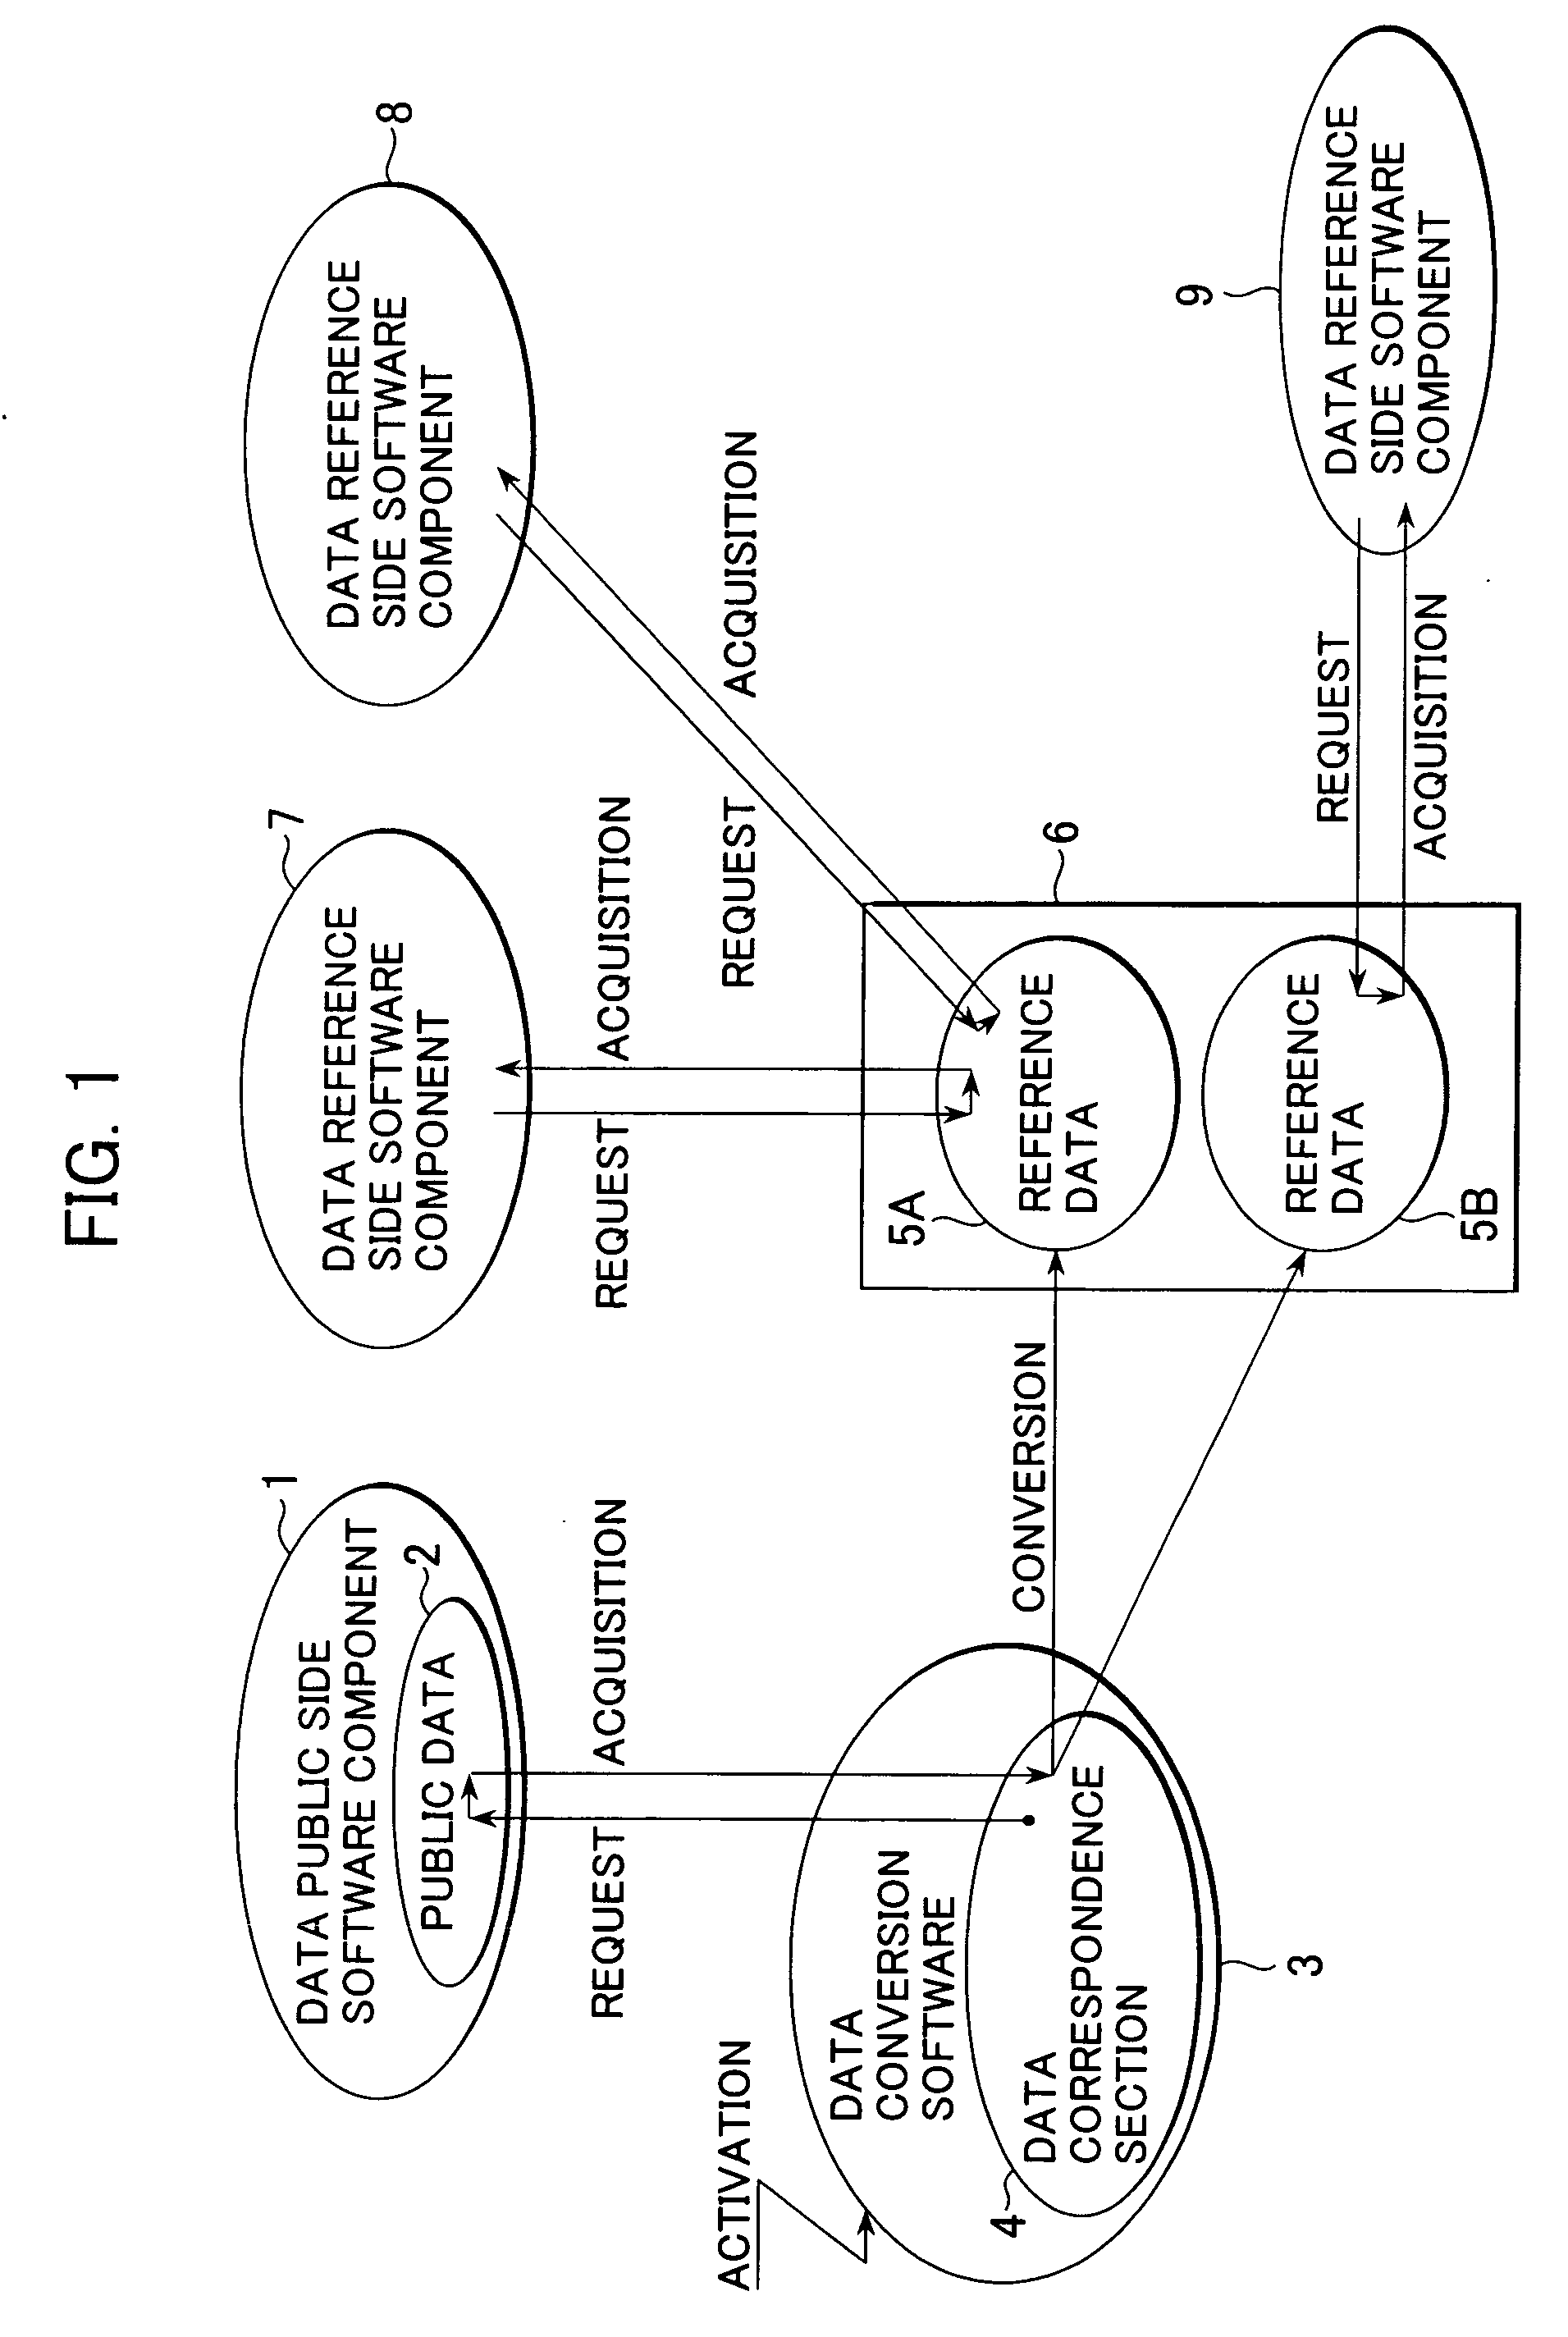 Vehicle control software and vehicle control apparatus